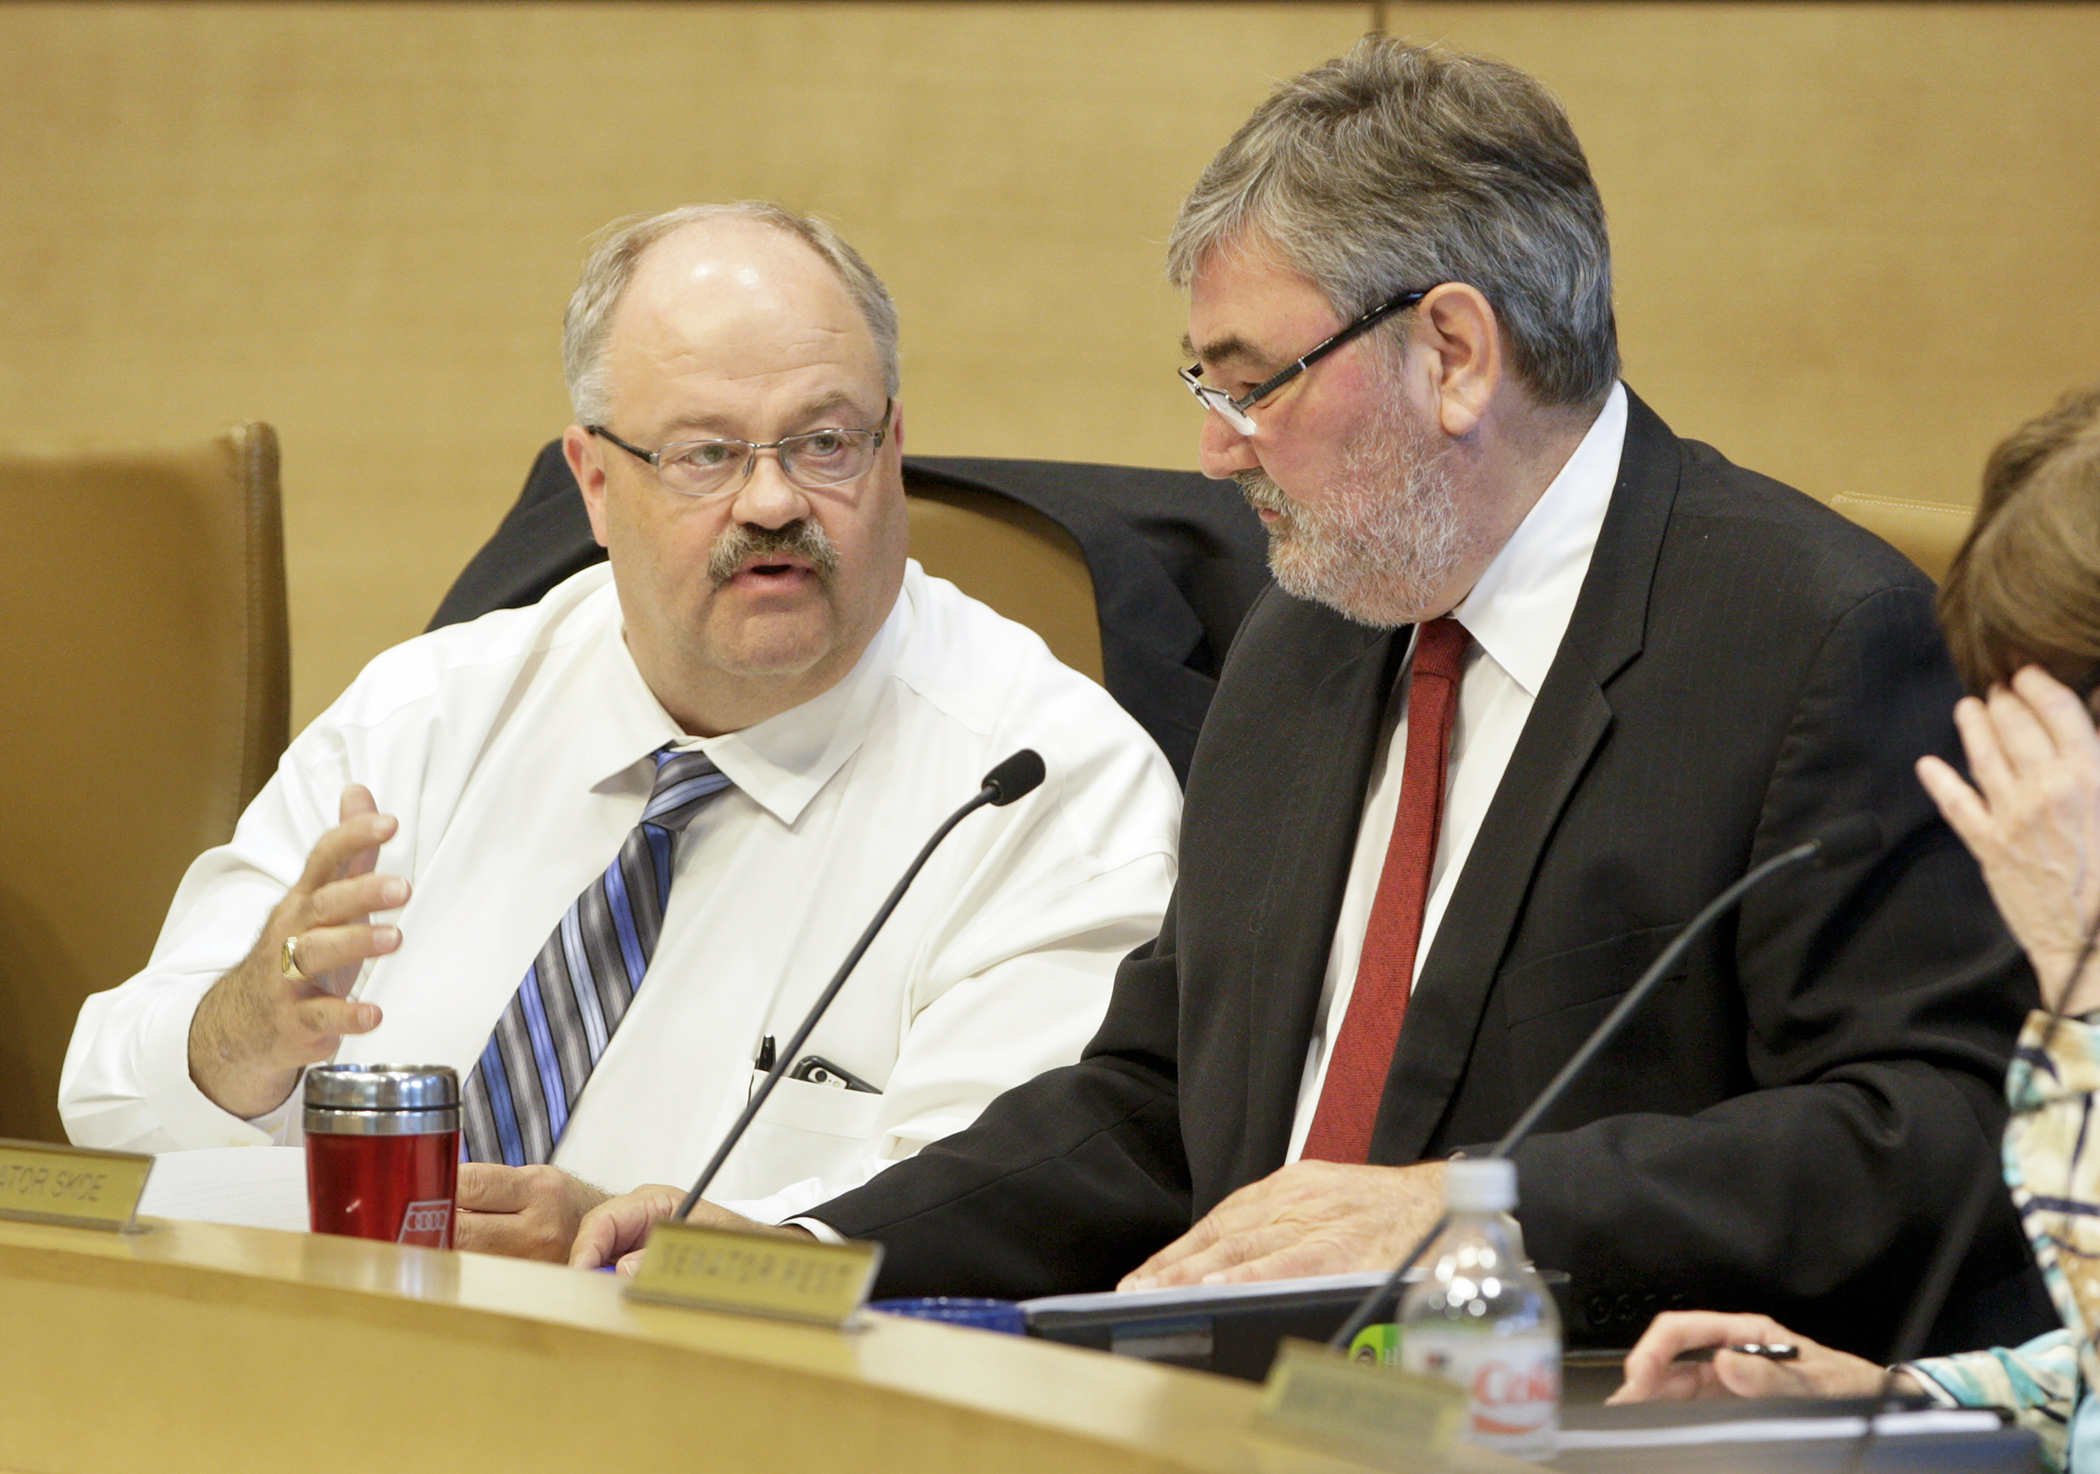 Rep. Greg Davids, left, and Sen. Rod Skoe confer during discussion of an amendment at the May 18 meeting of the tax conference committee. Photo by Paul Battaglia